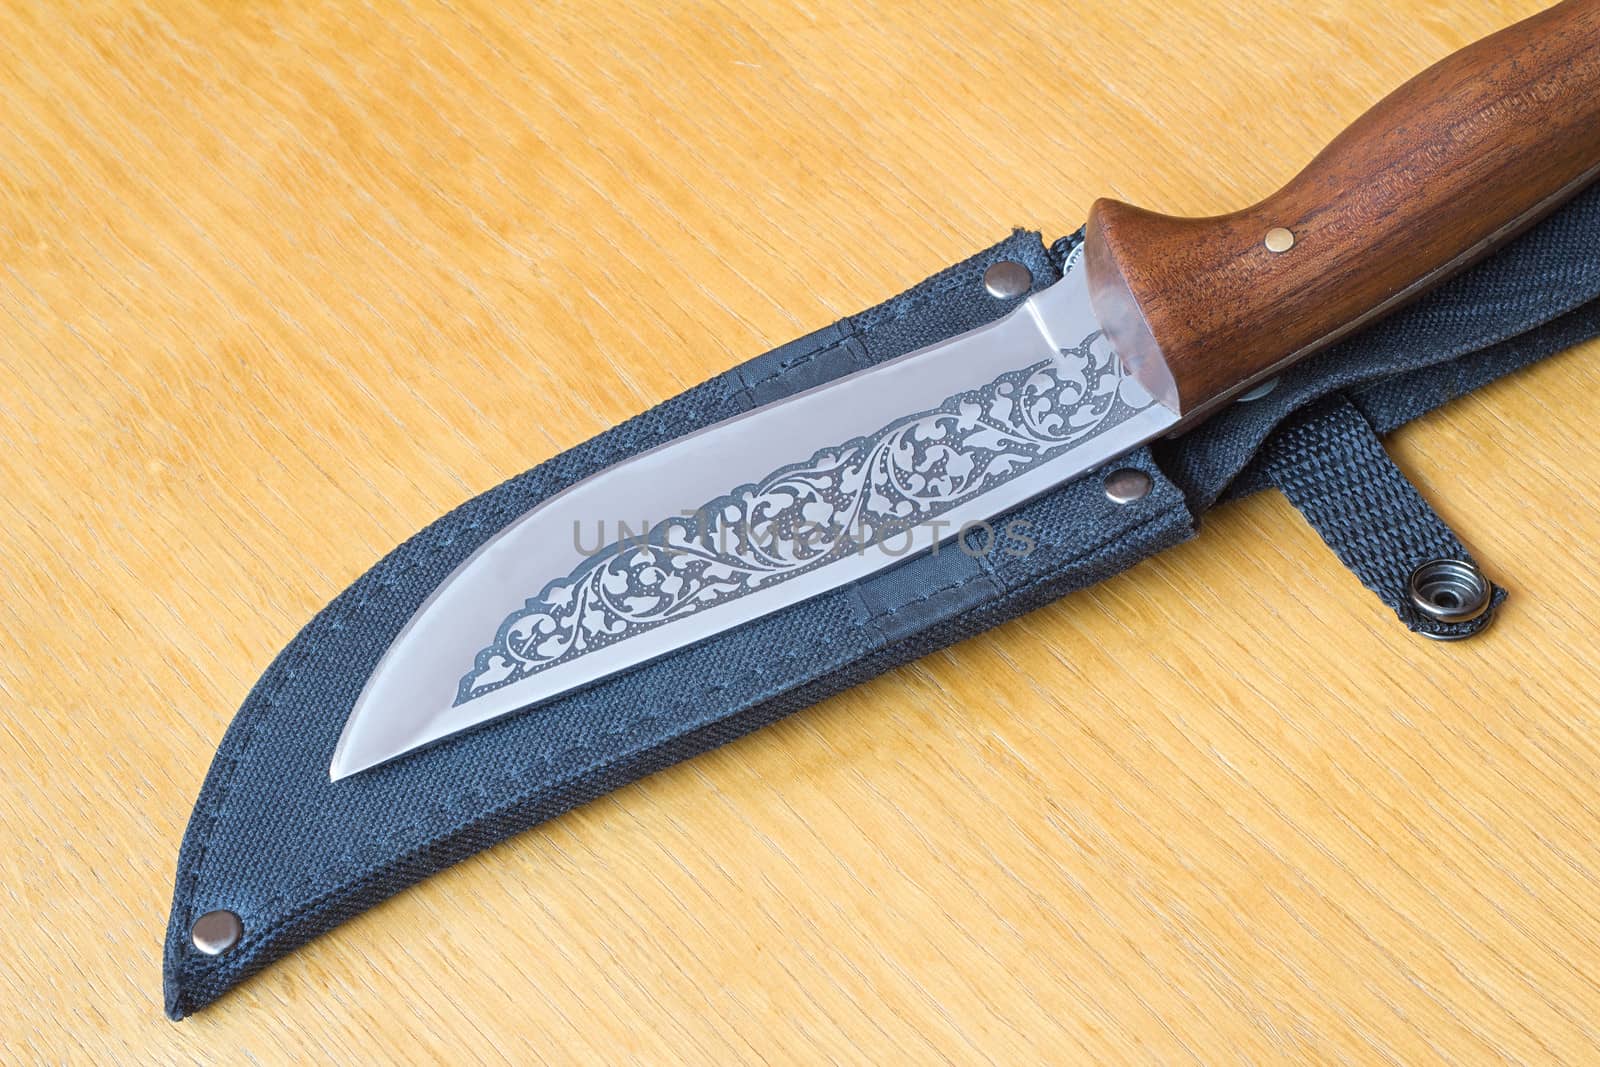 Large, beautifully decorated with a hunting knife and black case for a knife
Placed on the table.